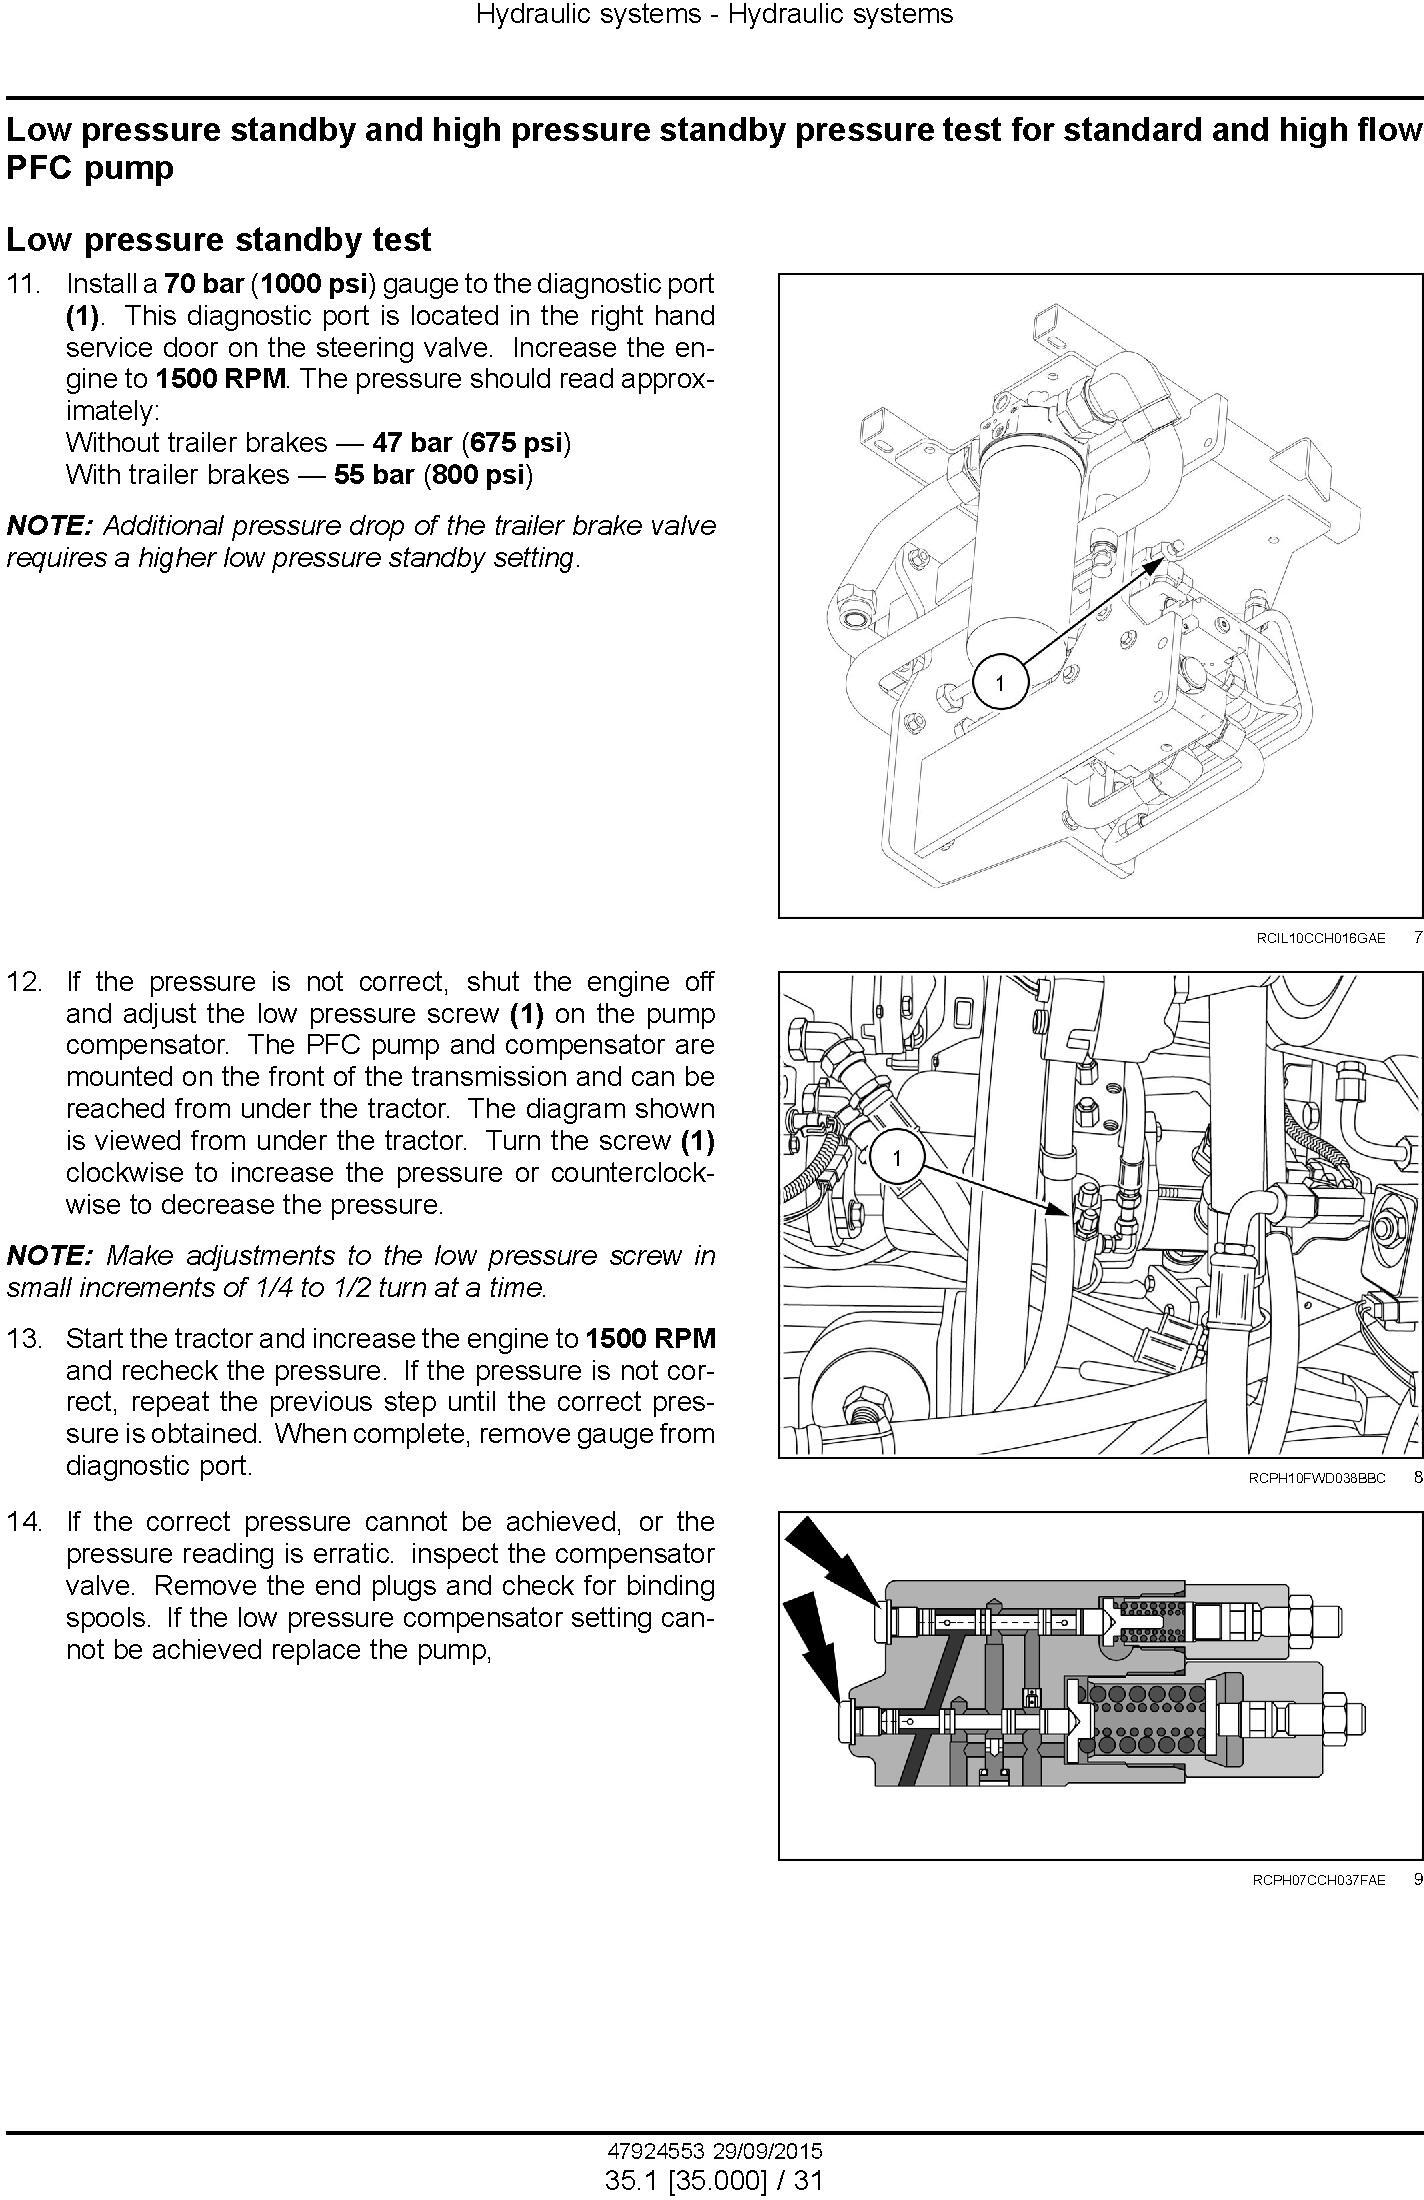 New Holland T9.435, T9.480, T9.530, T9.565, T9.600, T9.645, T9.700 Tractor Service Manual (Europe) - 3